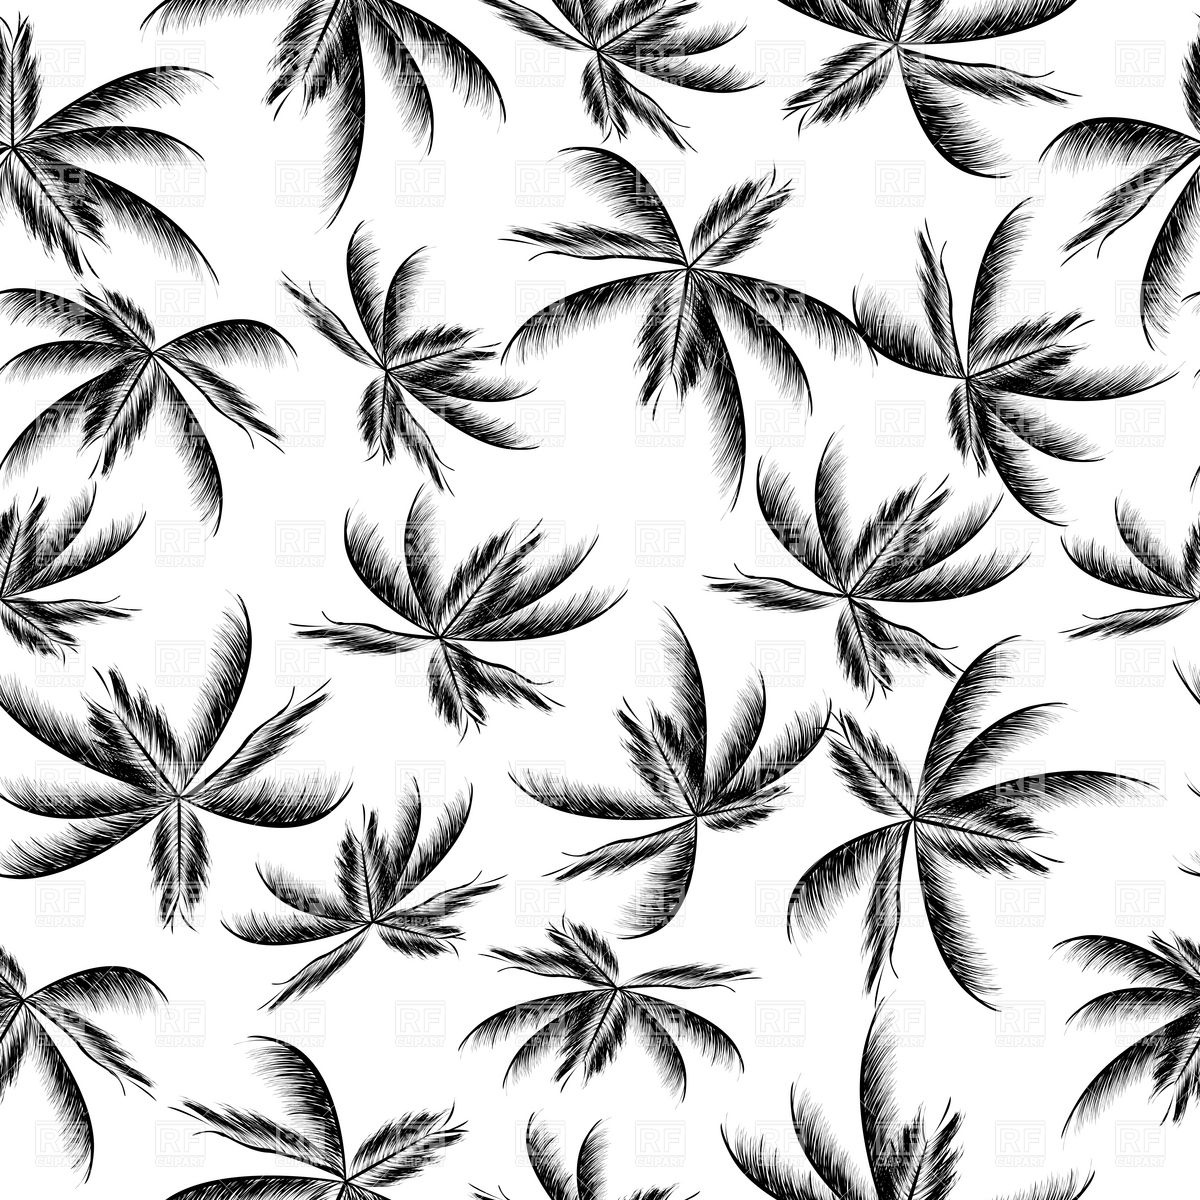 15 Palm Tree Free Vector Patterns Images